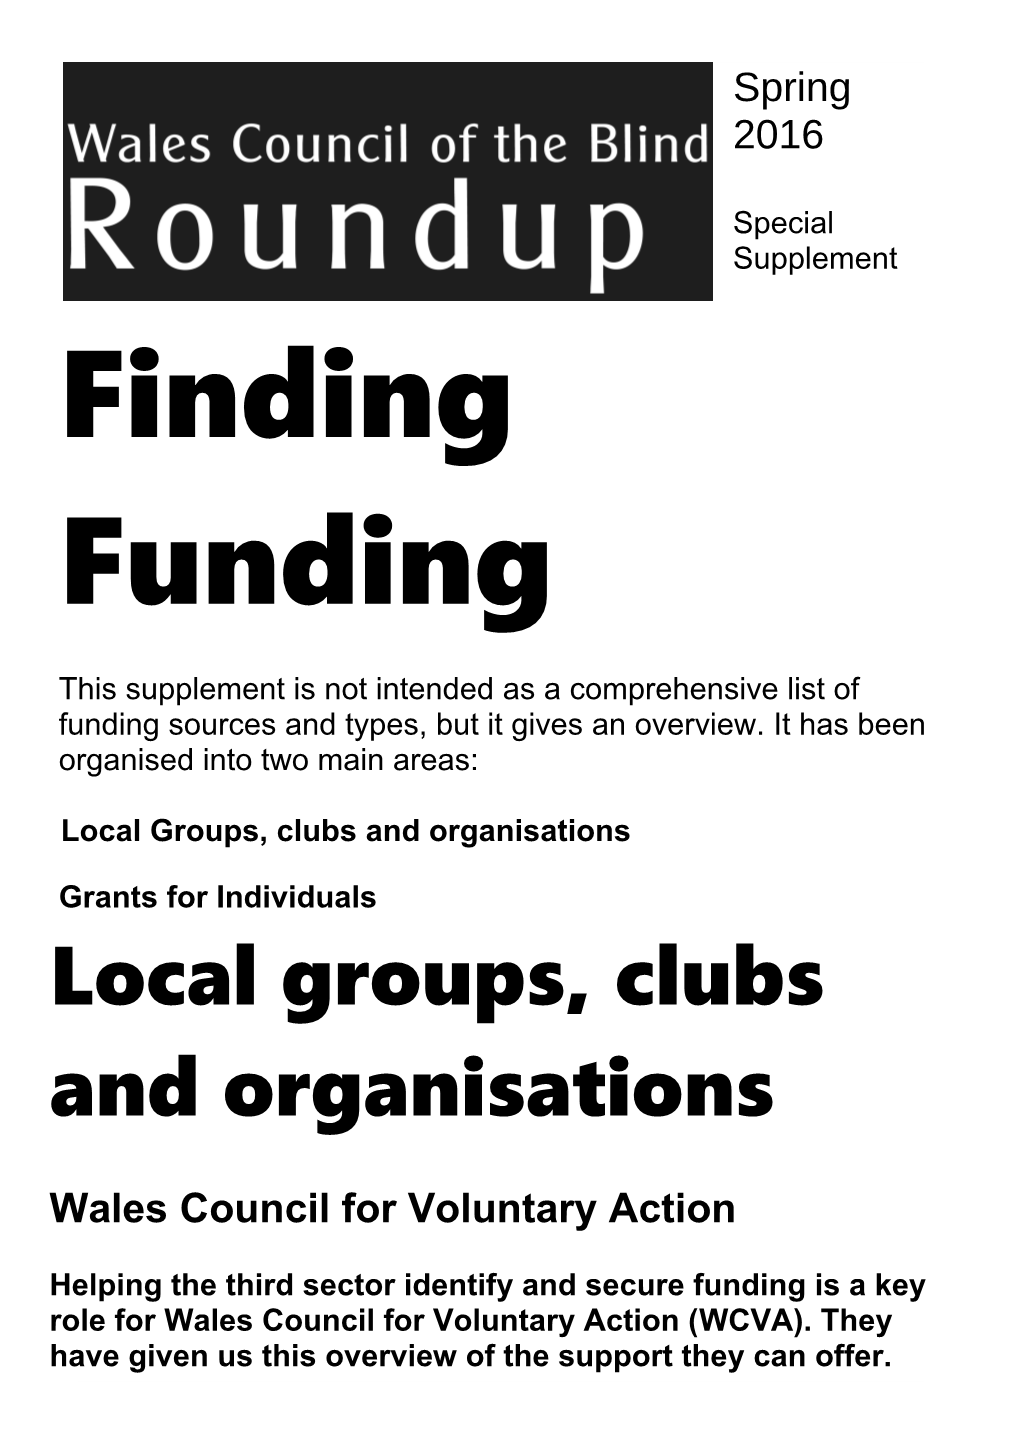 Local Groups, Clubs and Organisations